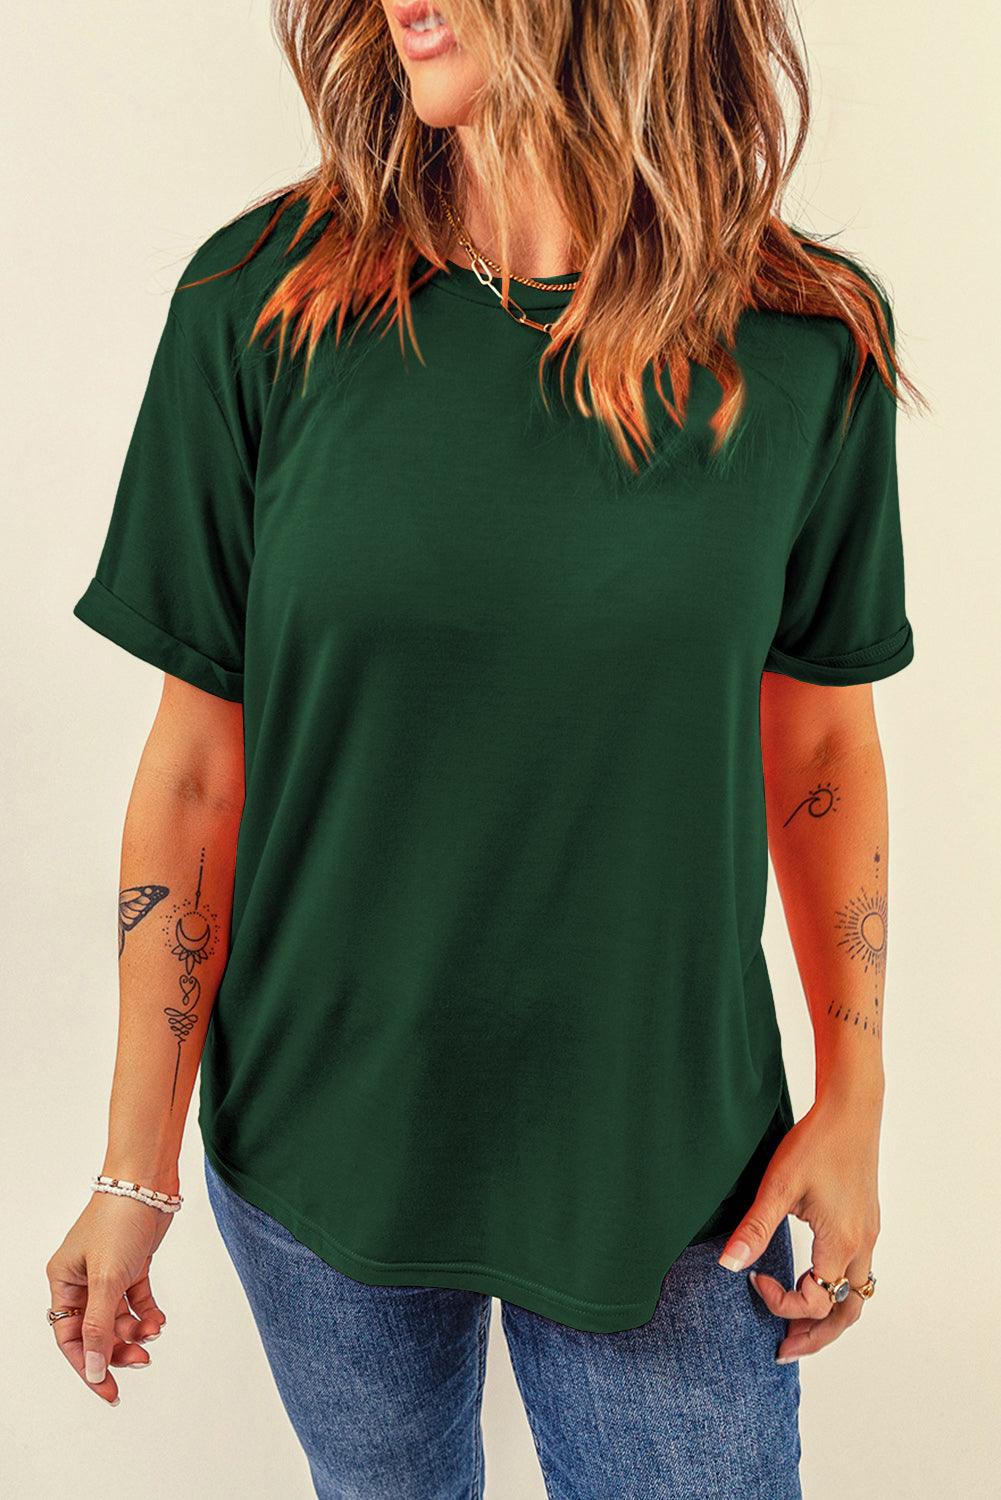 Green Casual Crew Neck Solid Color T-Shirts Loose Lightweight Tops for Women